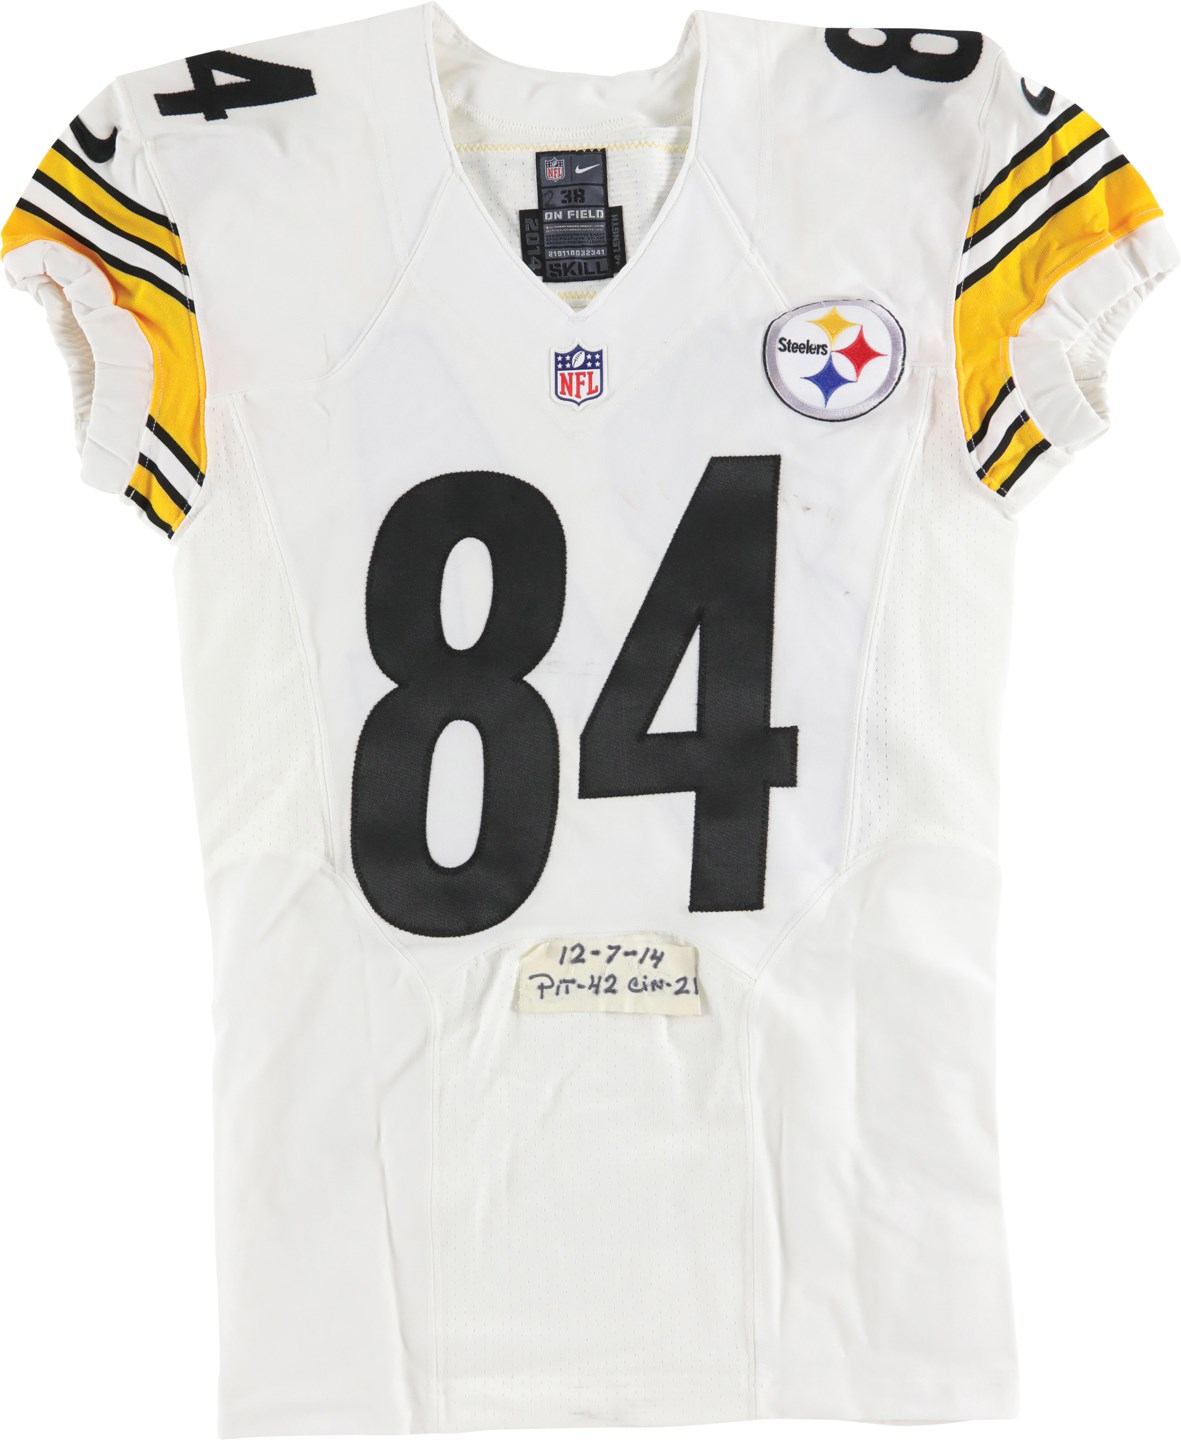 - 12/7/14 Antonio Brown Pittsburgh Steelers Signed Inscribed Game Worn Jersey (Photo-Matched)